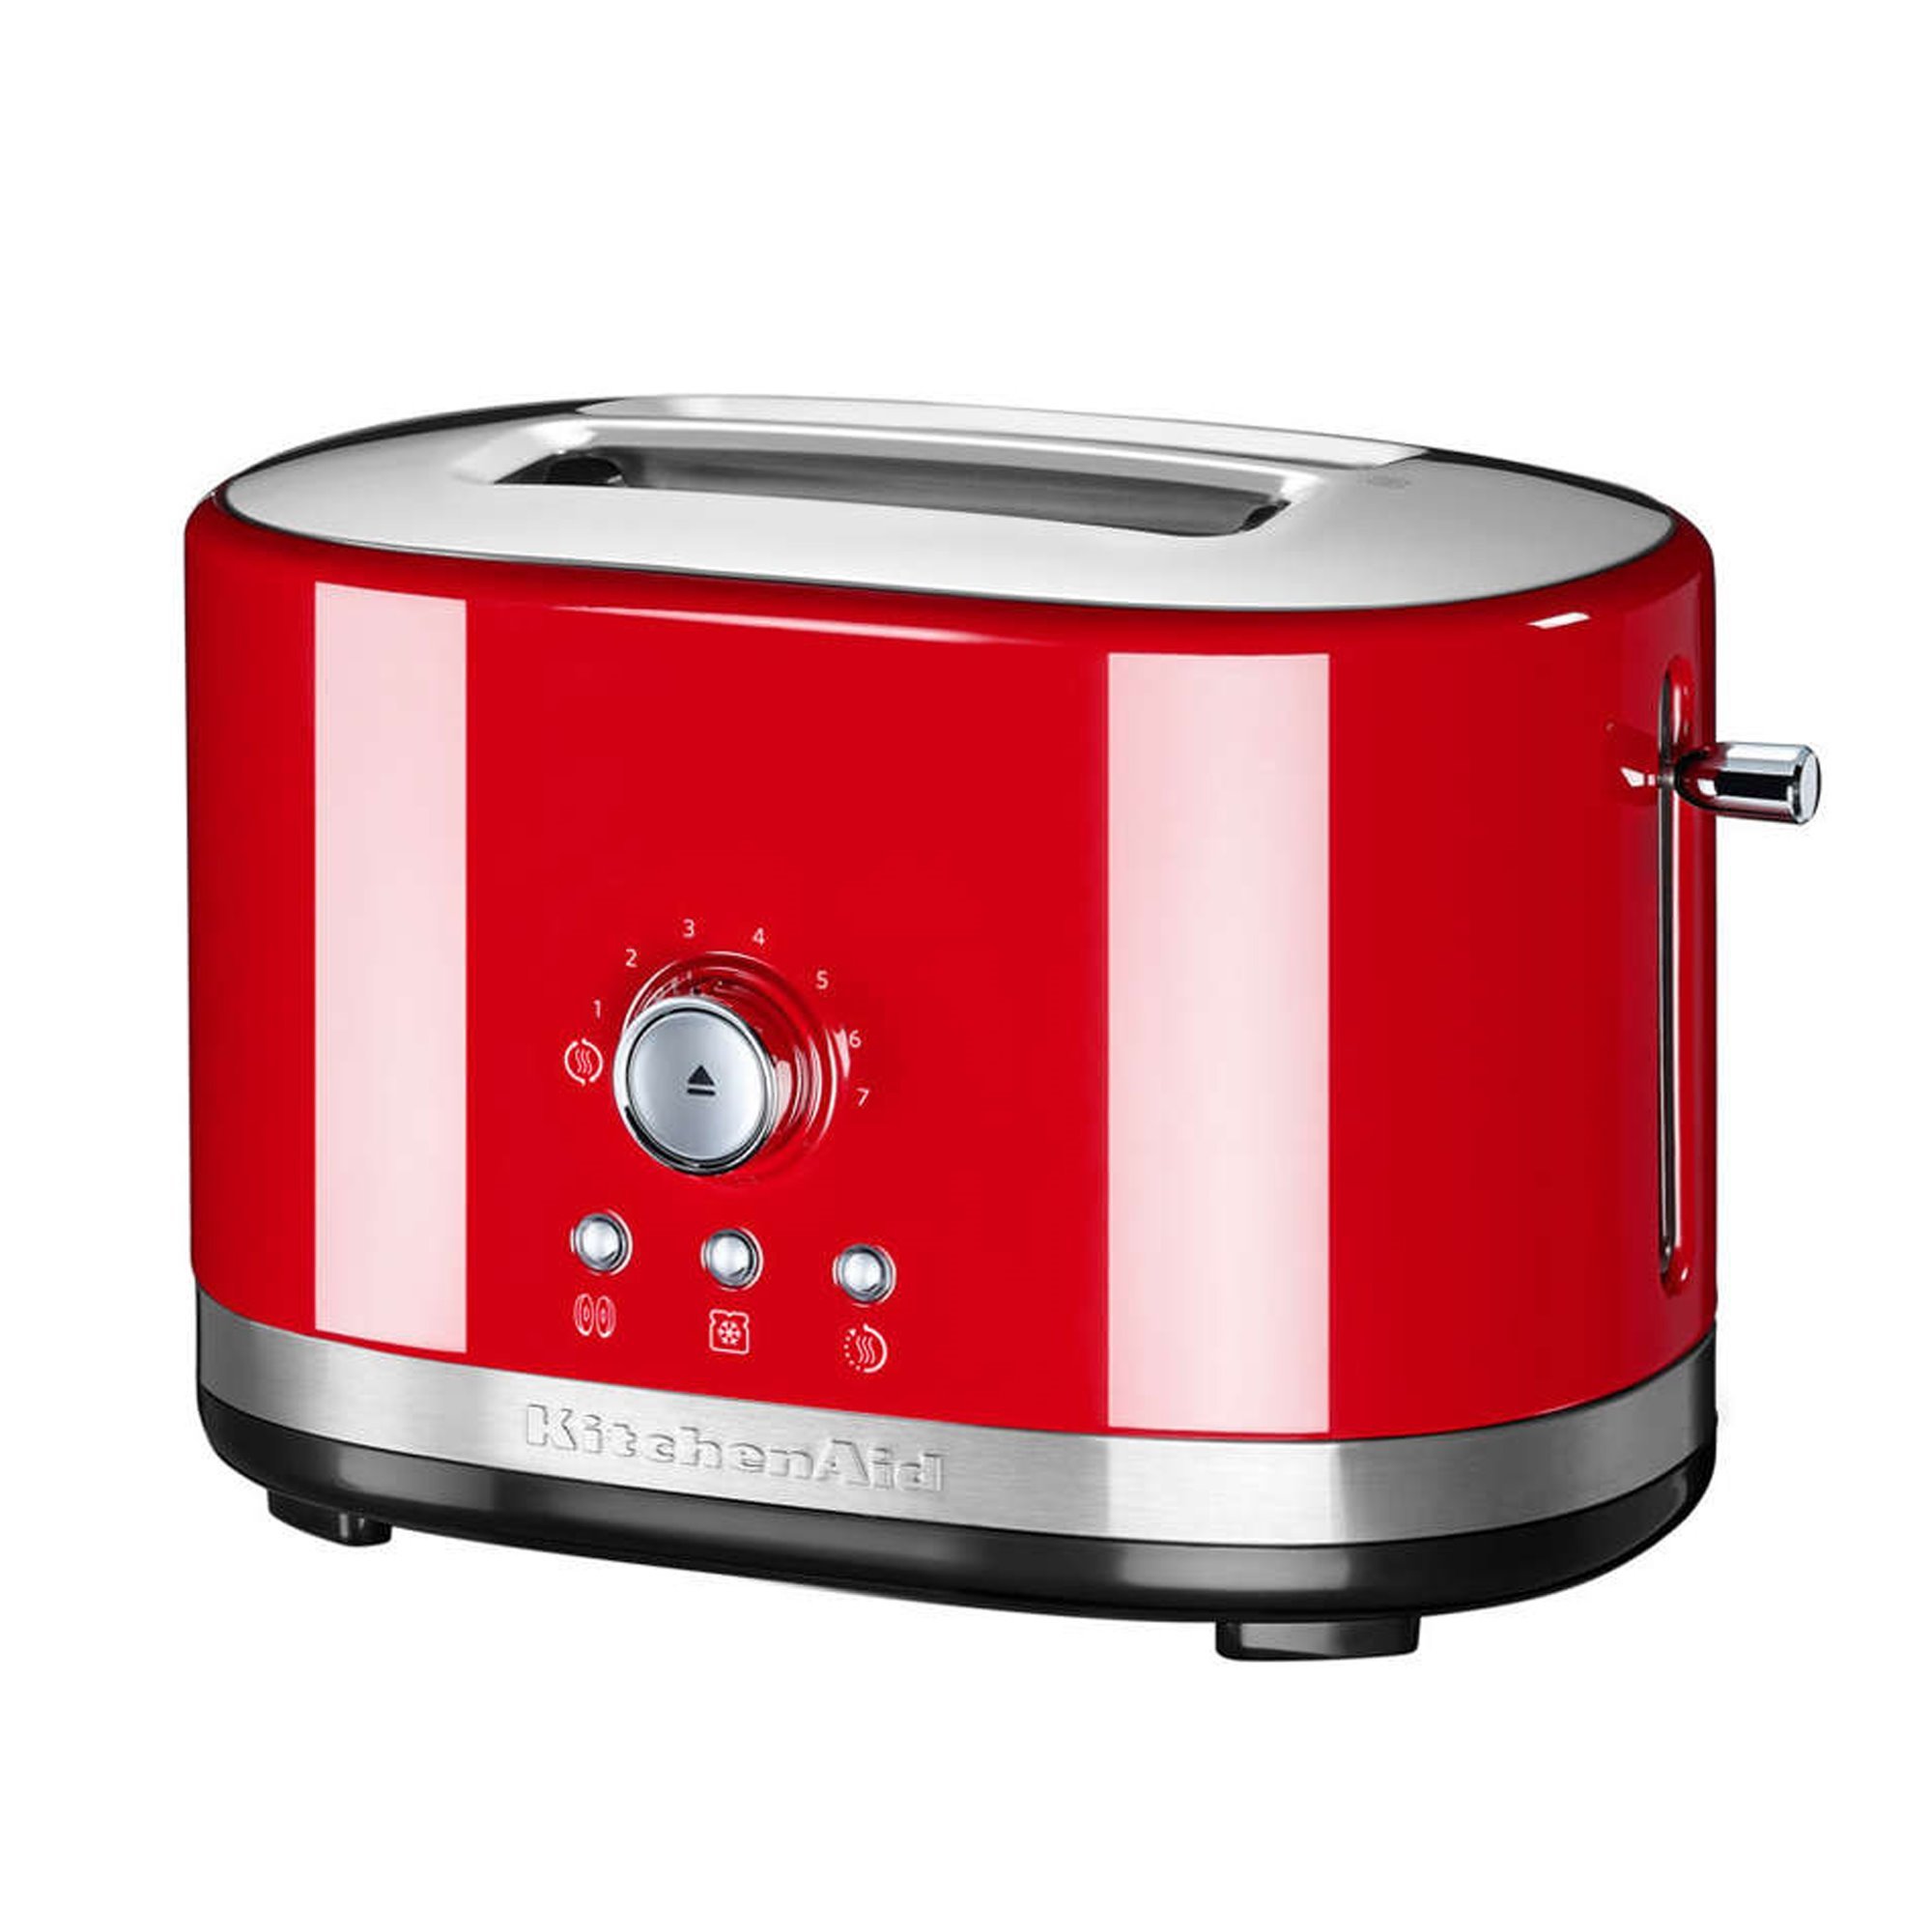 KitchenAid 2-Slice Toaster with Manual Lift Lever - Empire Red